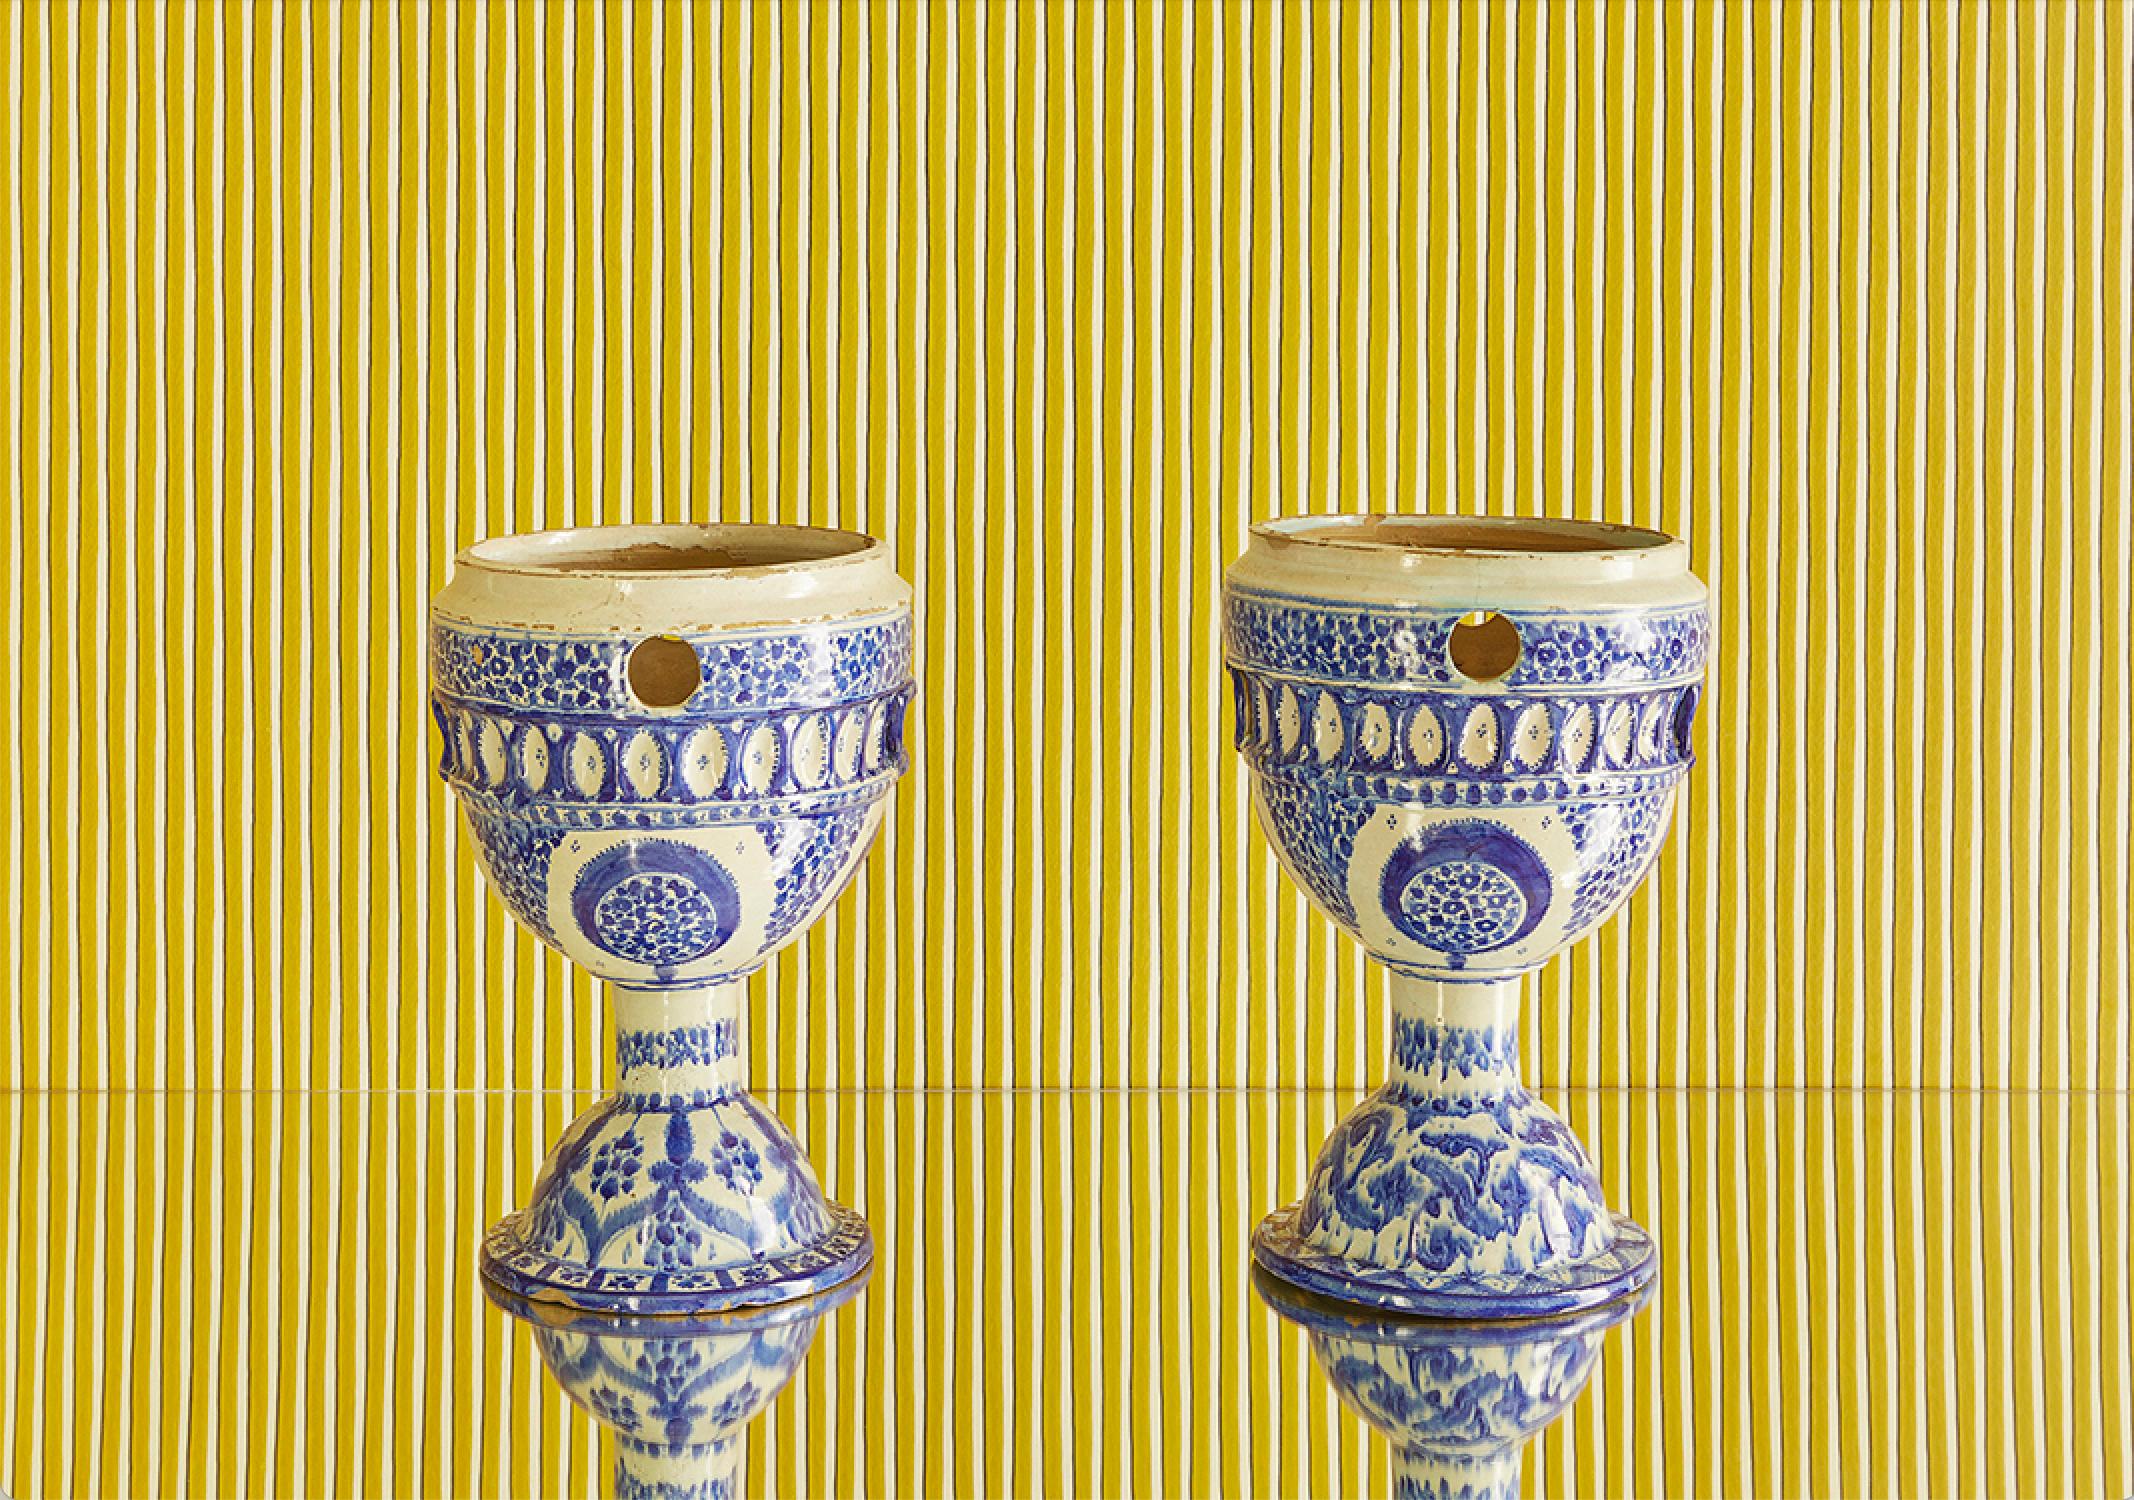 Europe, 20th Century

A pair of flowers pots on tall bases wiht blue decorations.

H 31 x Ø 22 cm